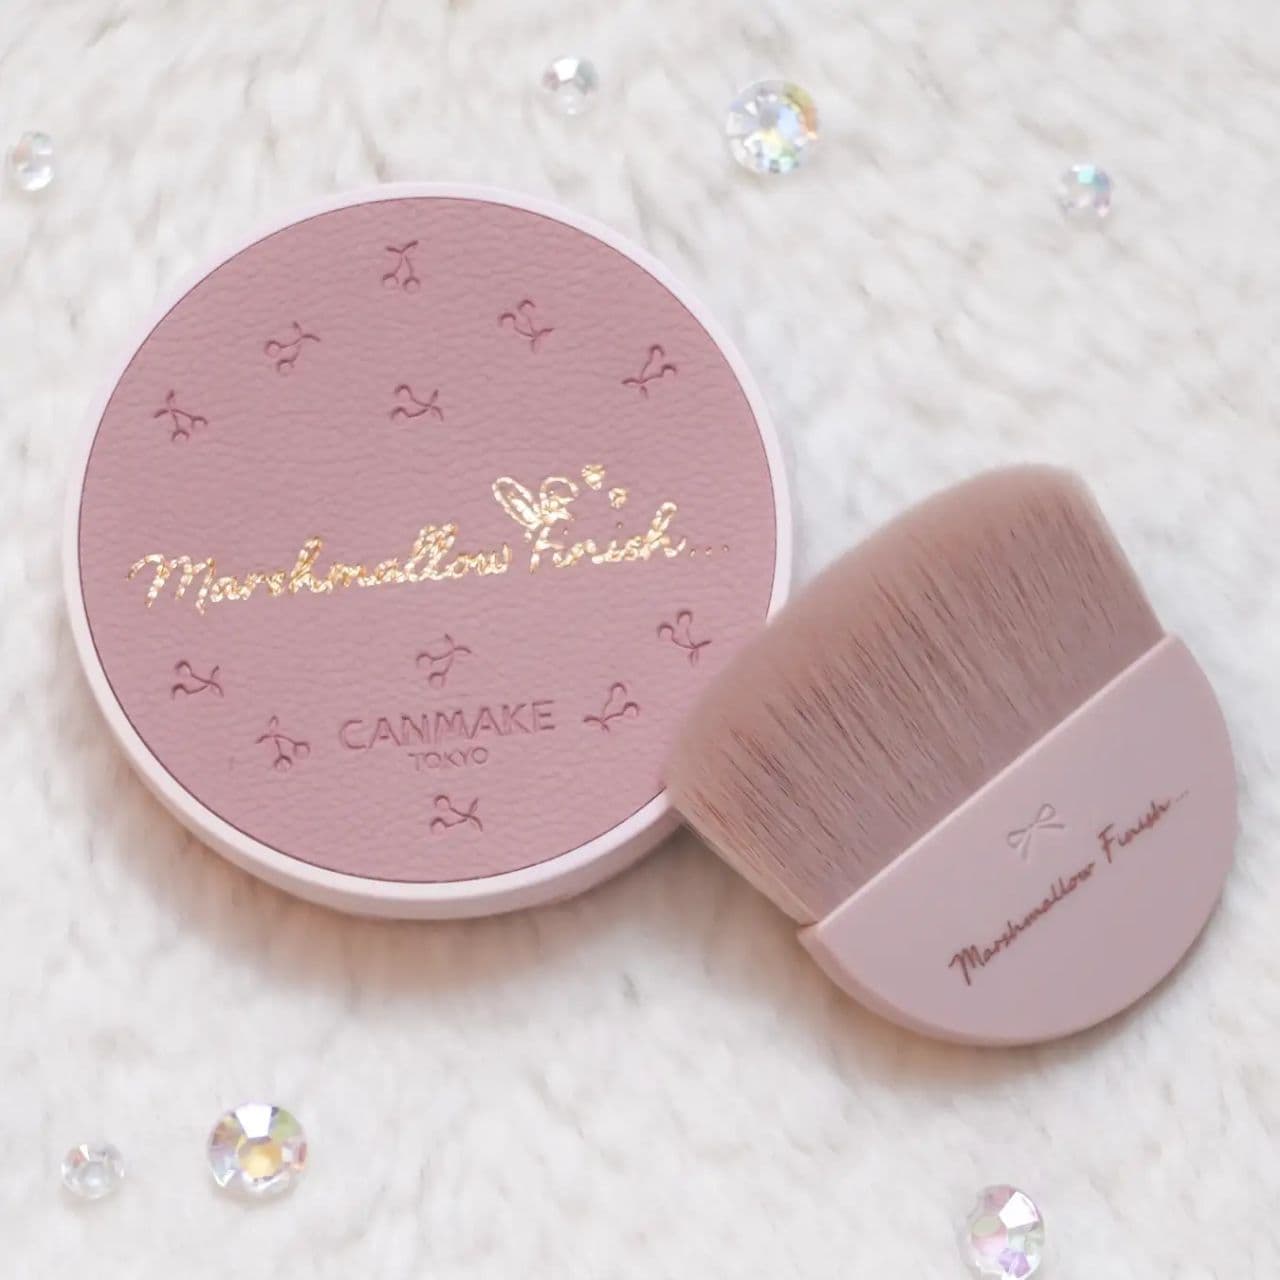 Canmake “Marshmallow Finish Powder” limited package